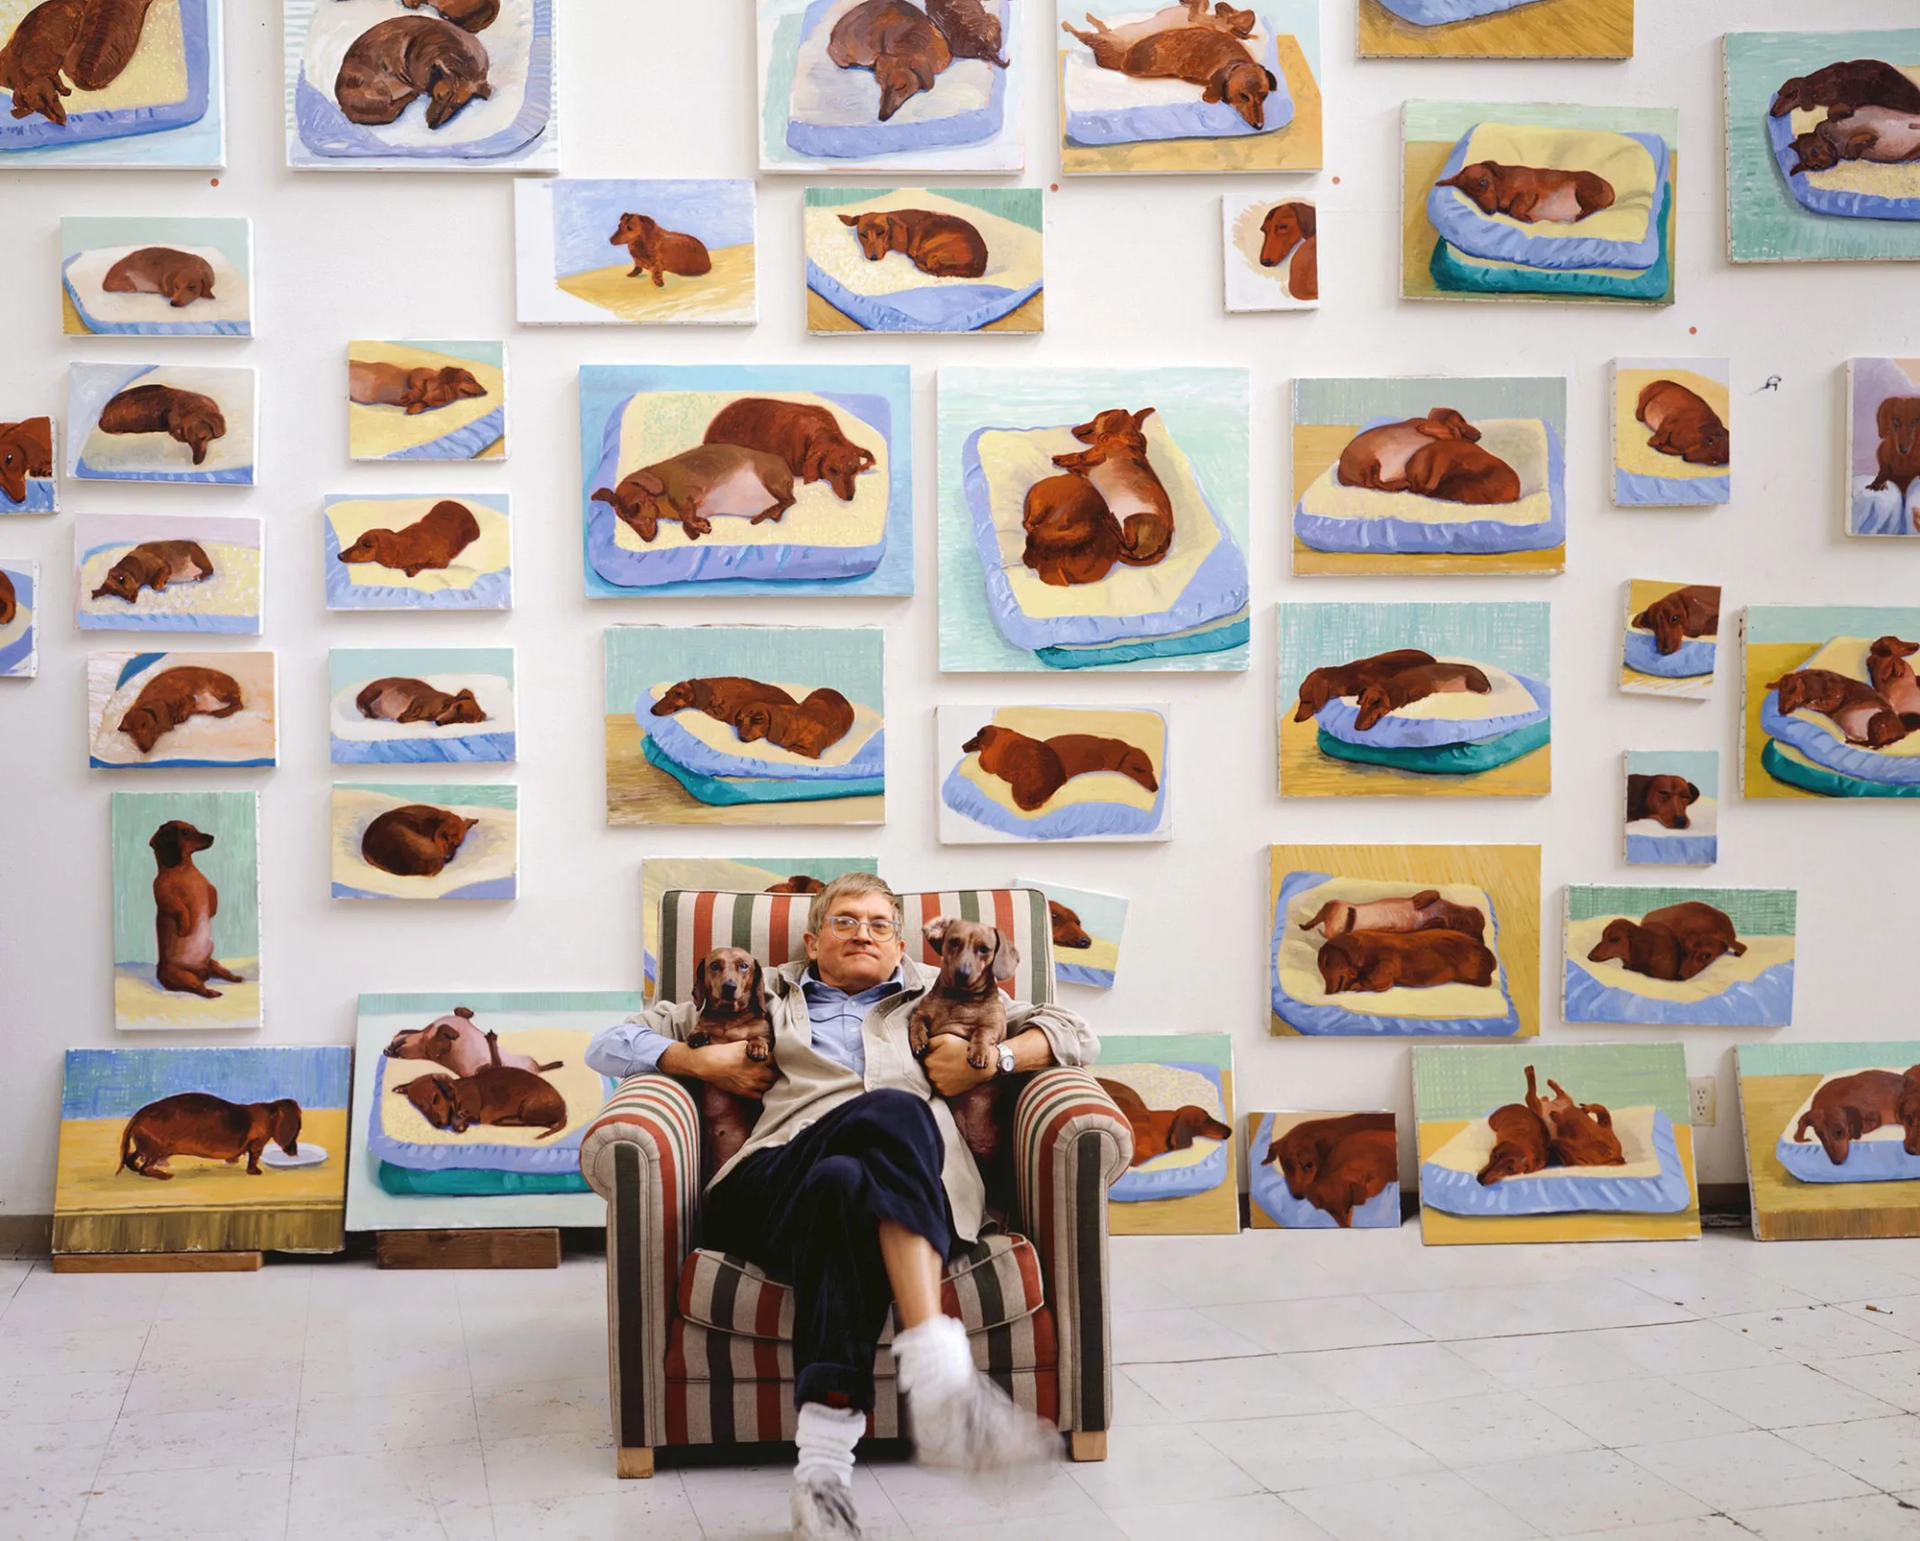 This protograph depicts the artist David Hockney sitting in an armchair with two dachshunds – his dogs Stanley and Boodgie - in front of a wall filled with artwork inspired by the two dogs.